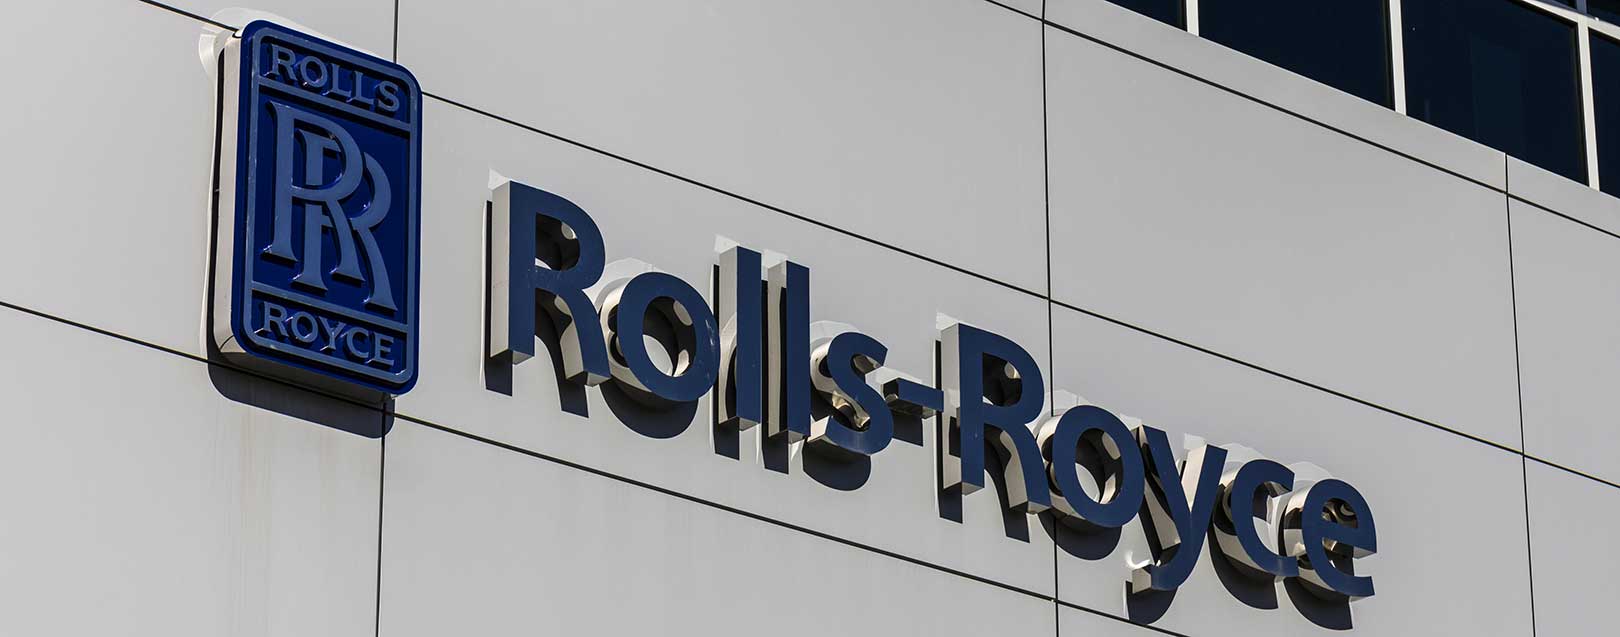 Rolls-Royce let off the hook with heavy penalty of $800 million